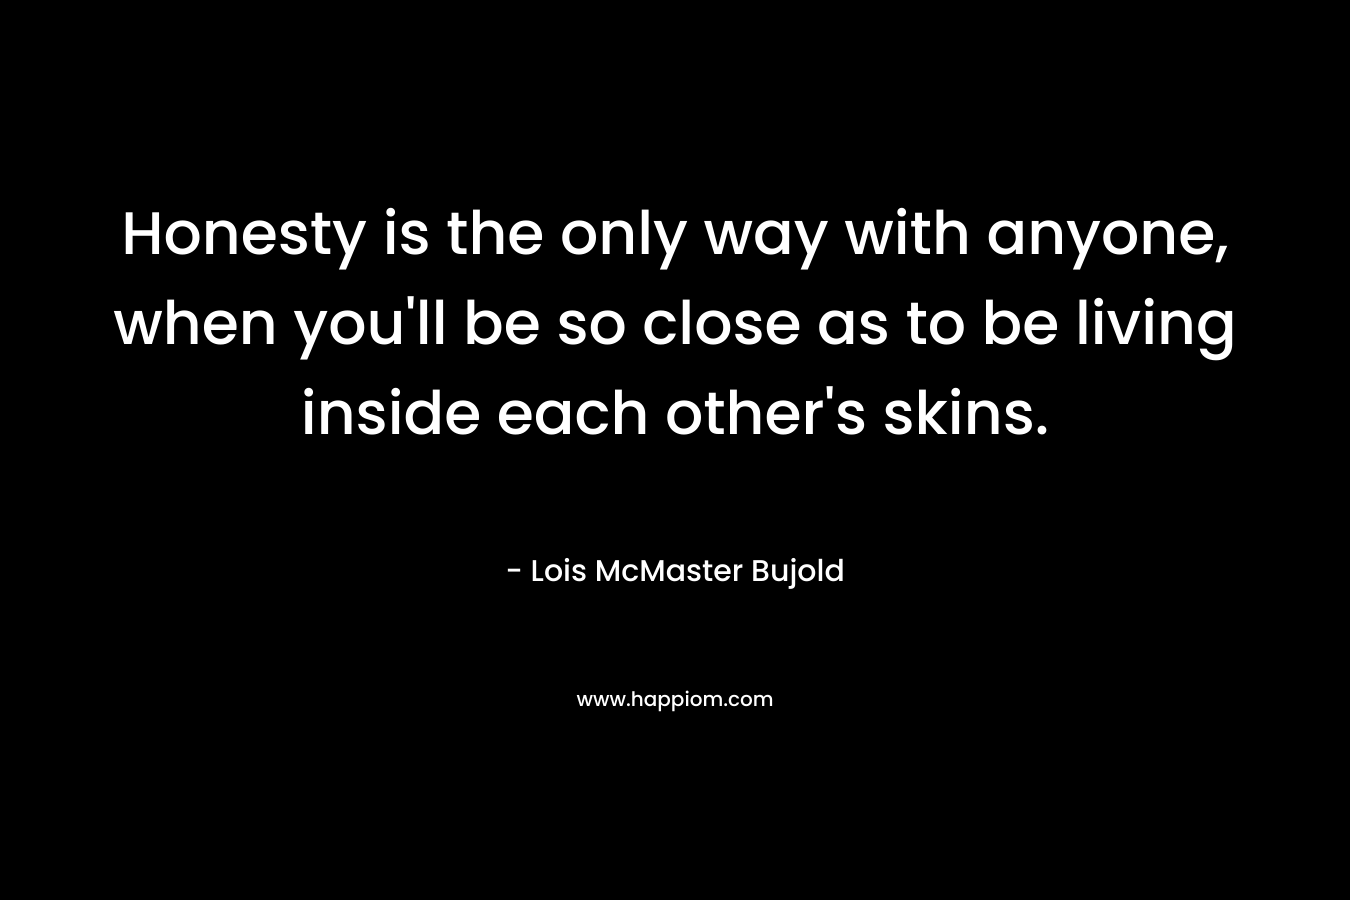 Honesty is the only way with anyone, when you’ll be so close as to be living inside each other’s skins. – Lois McMaster Bujold